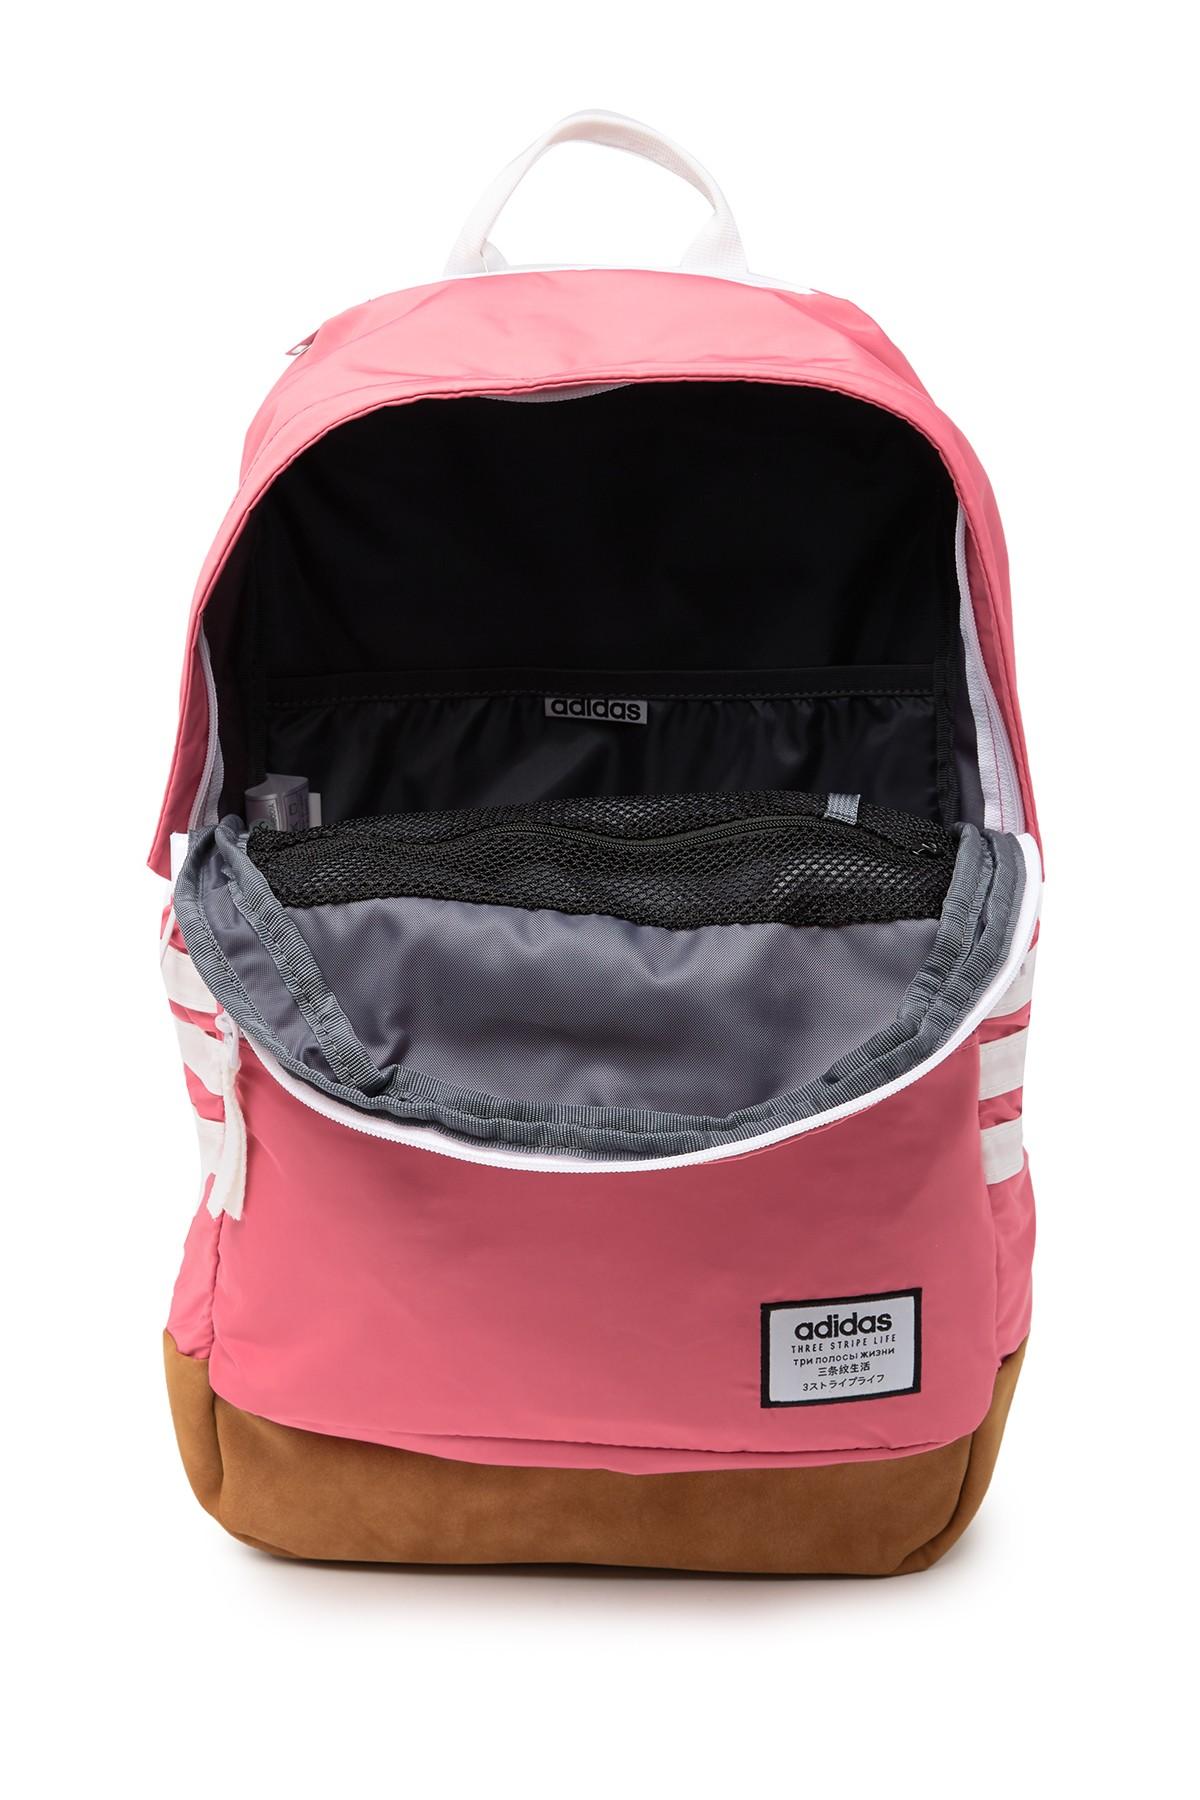 adidas classic 3s backpack pink